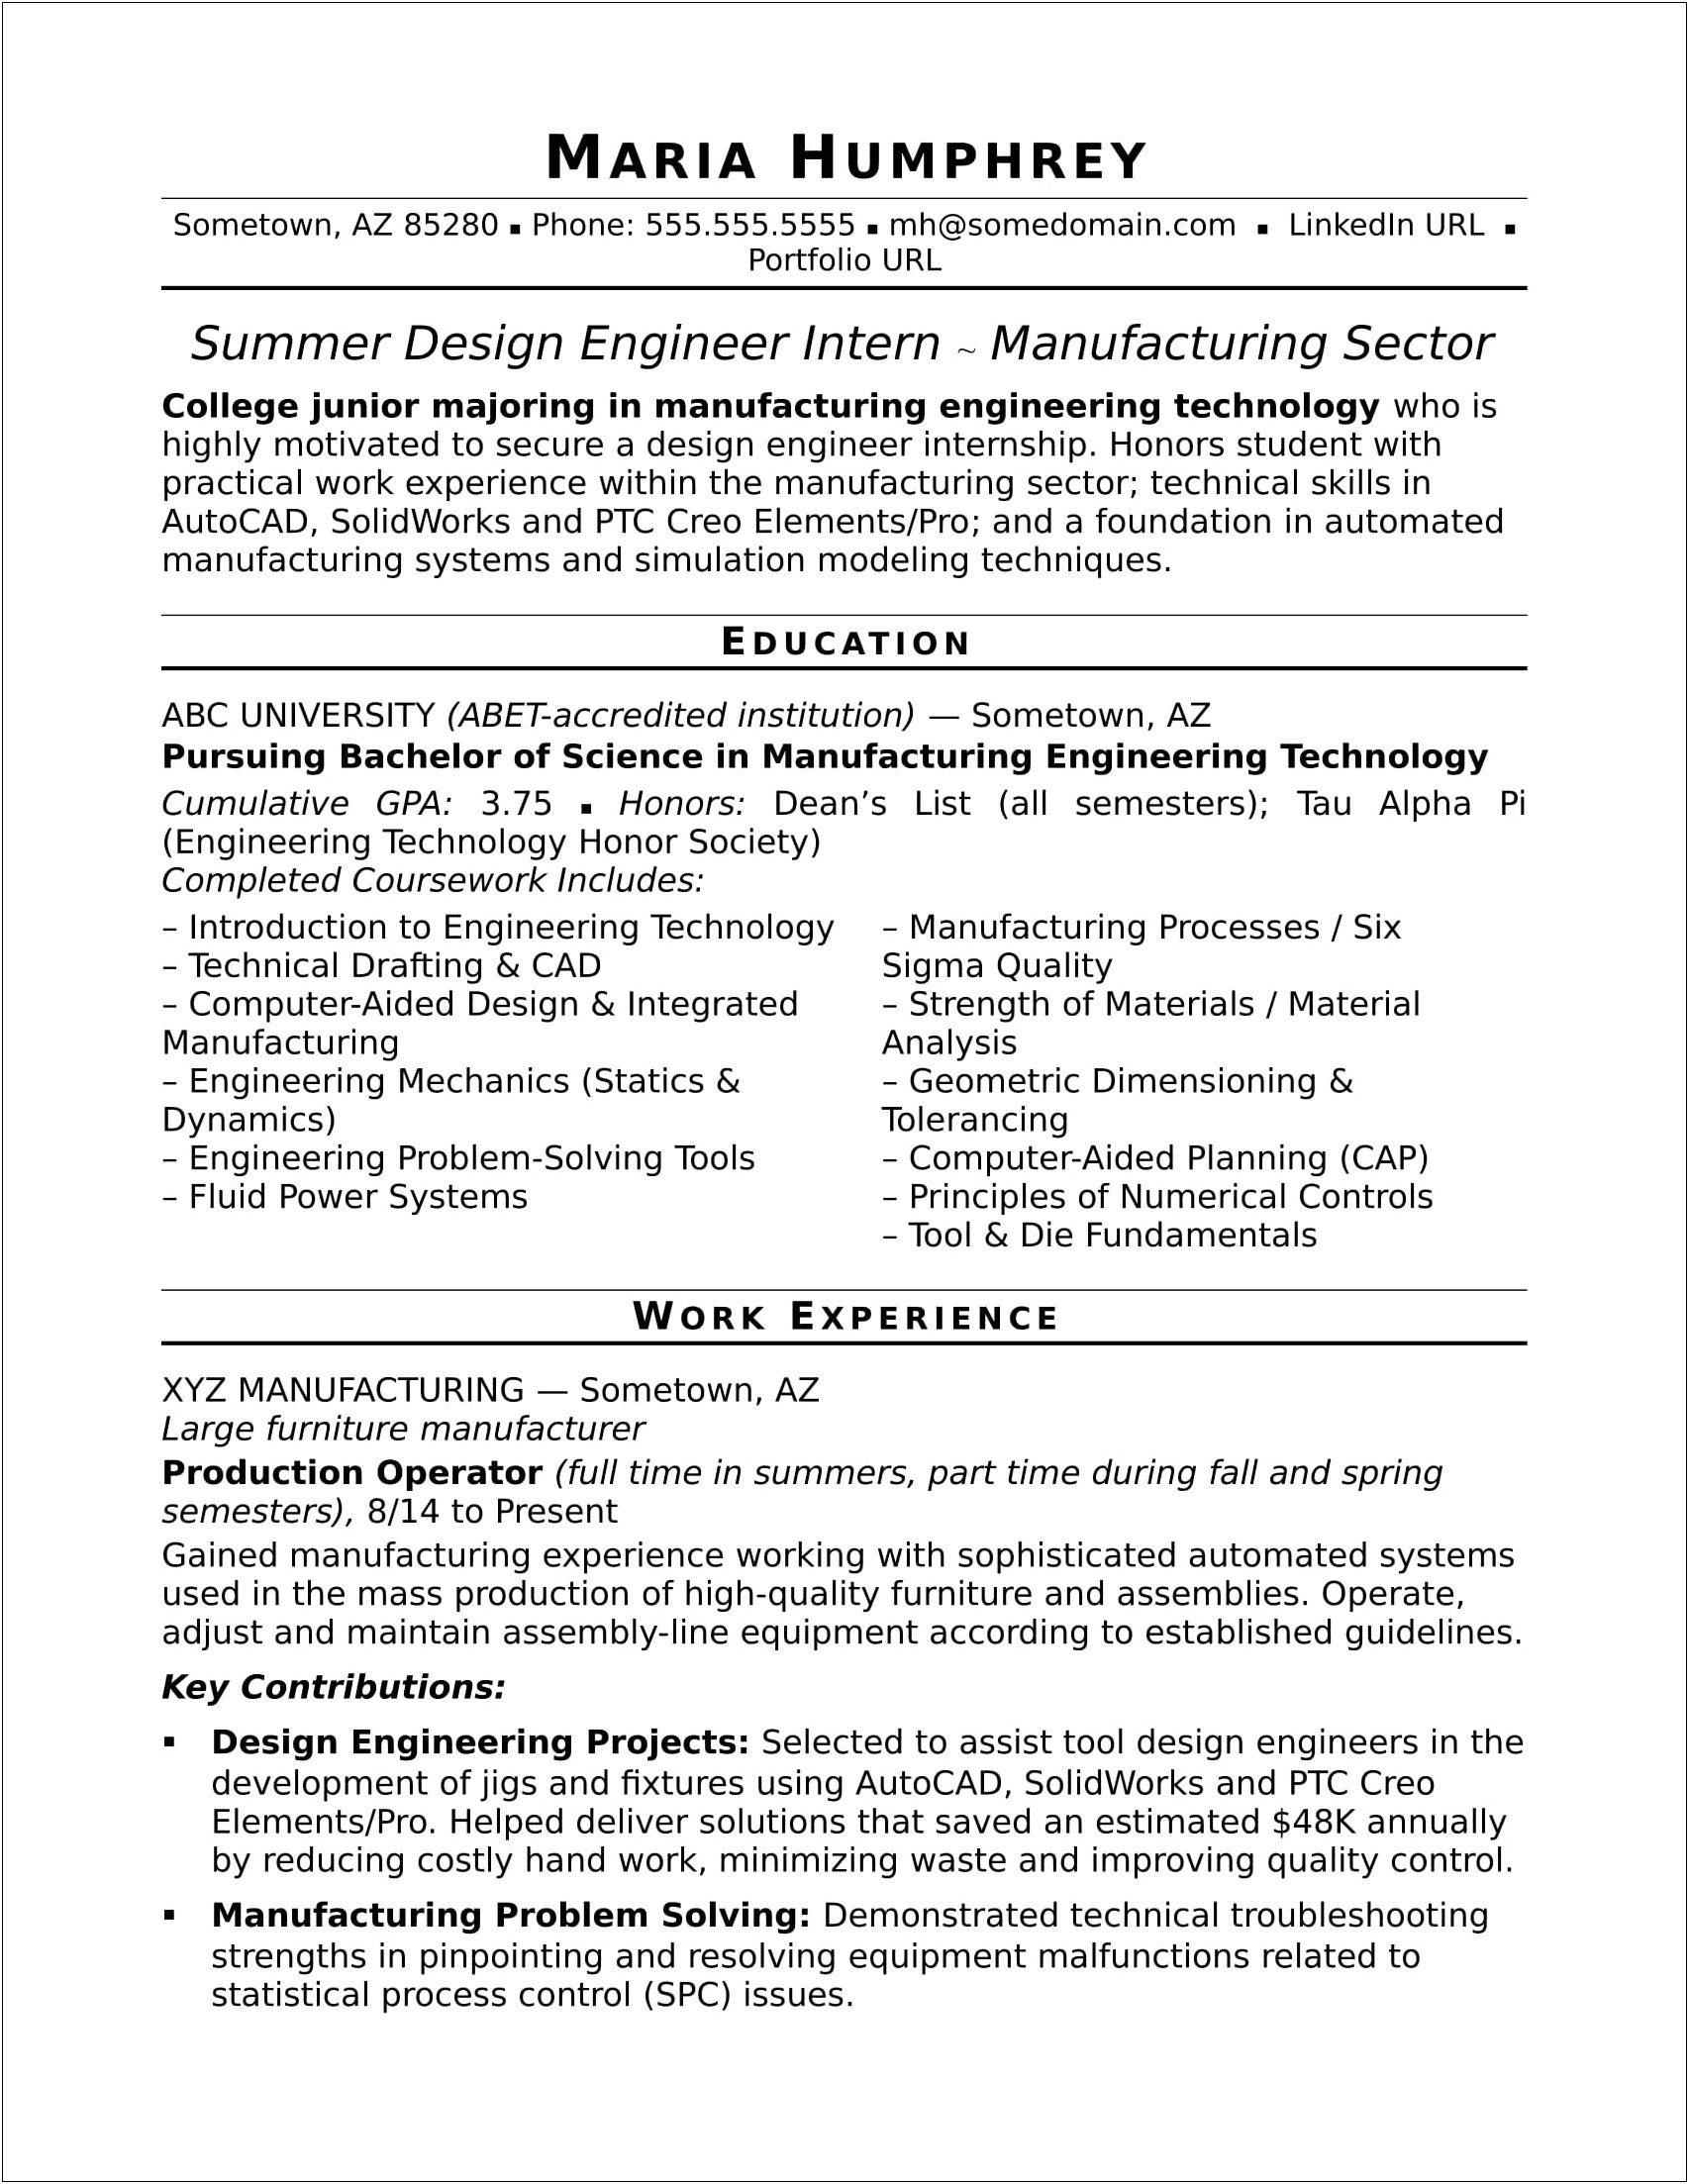 Resume Examples Of Engineers For Internship